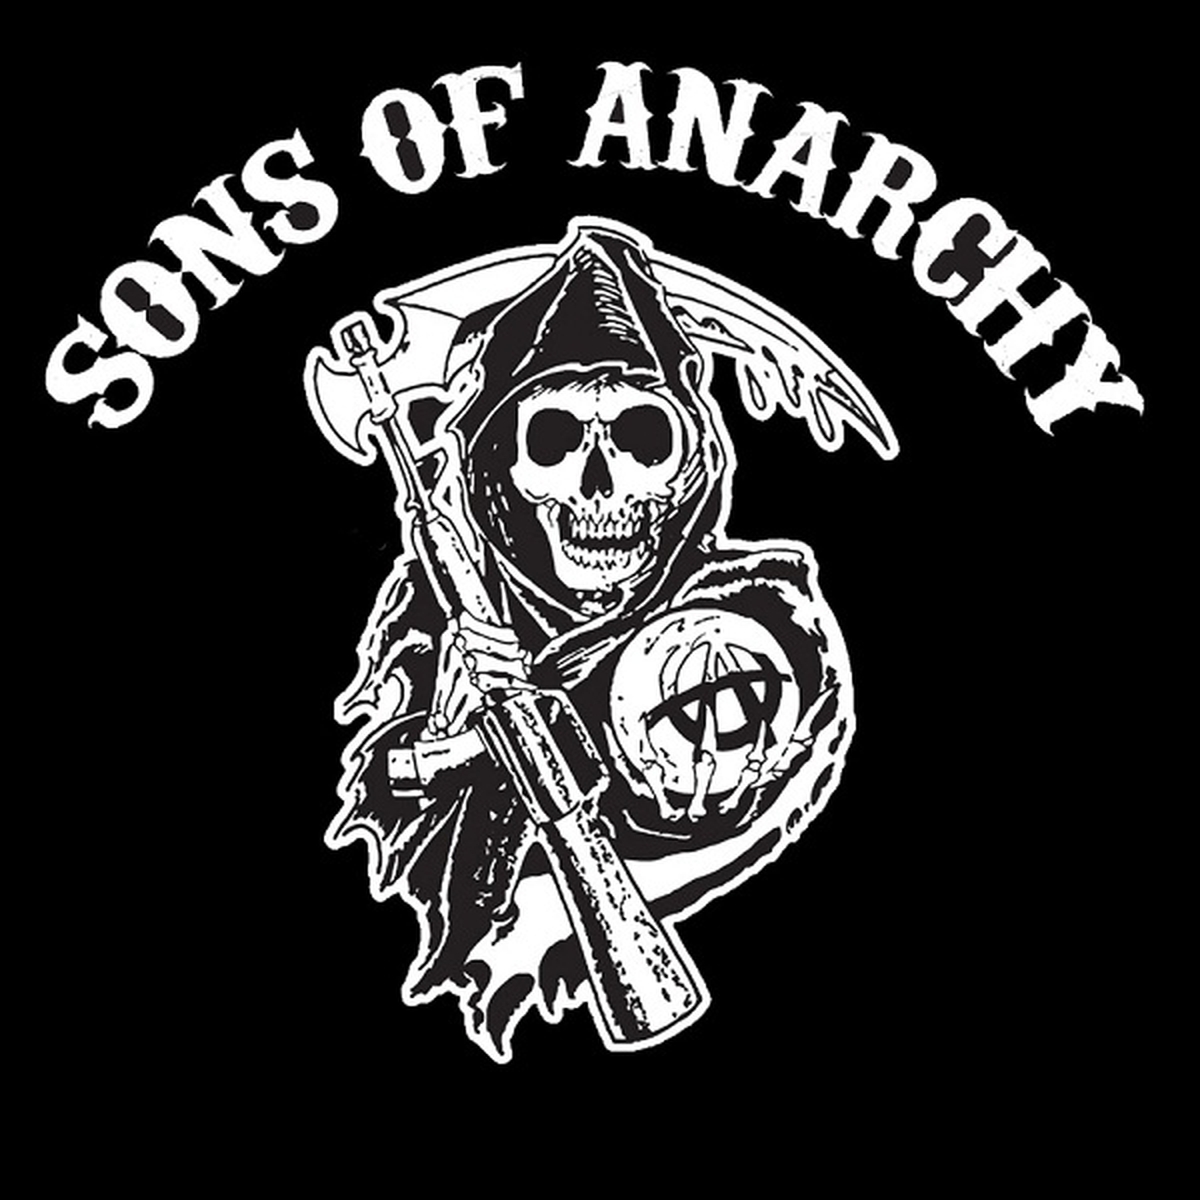 Sons of Anarchy demo